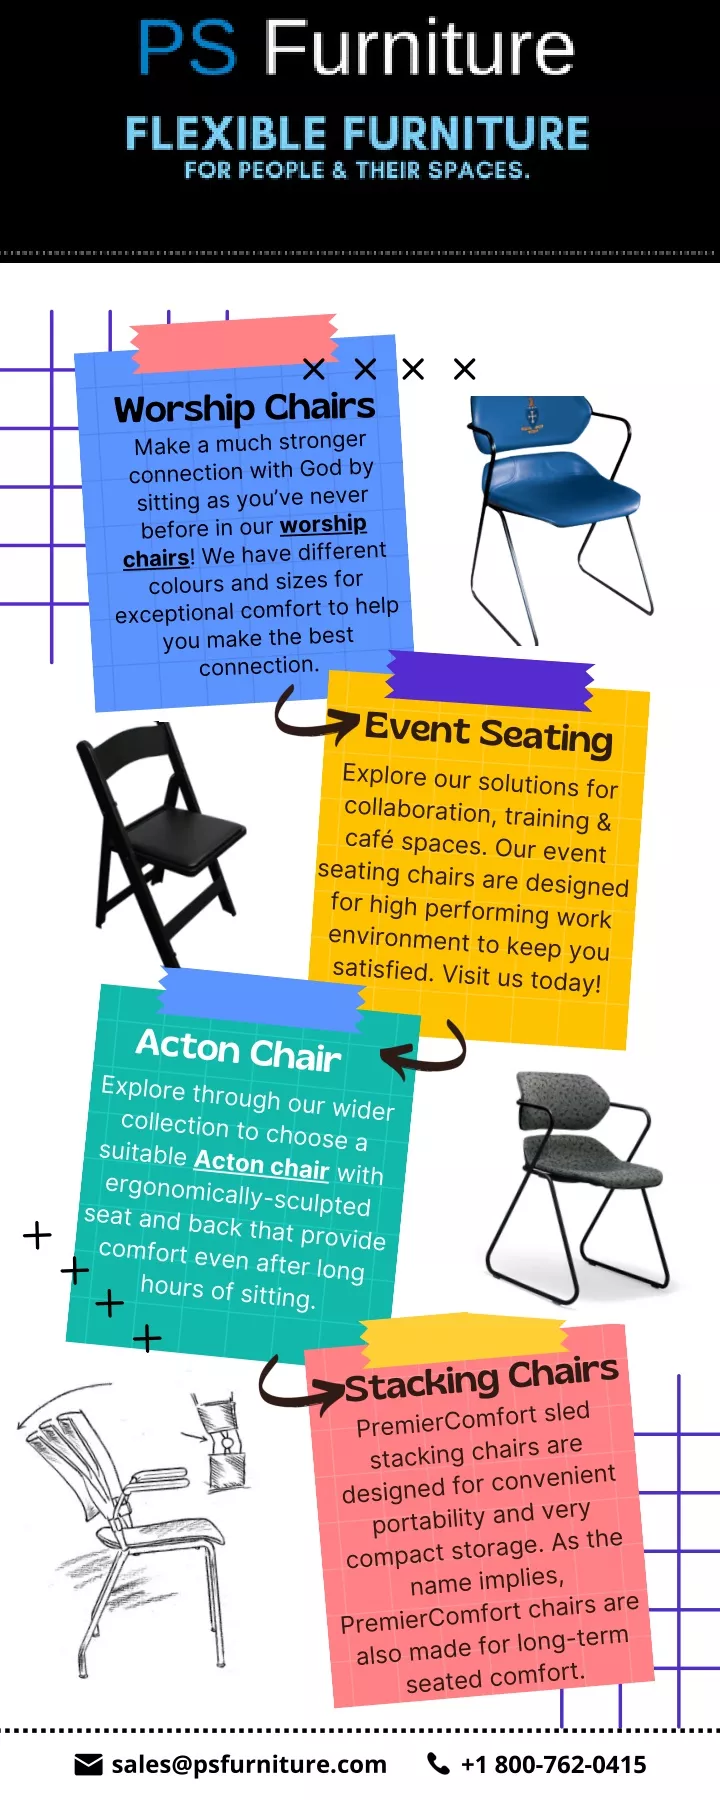 worship chairs make a much stronger connection